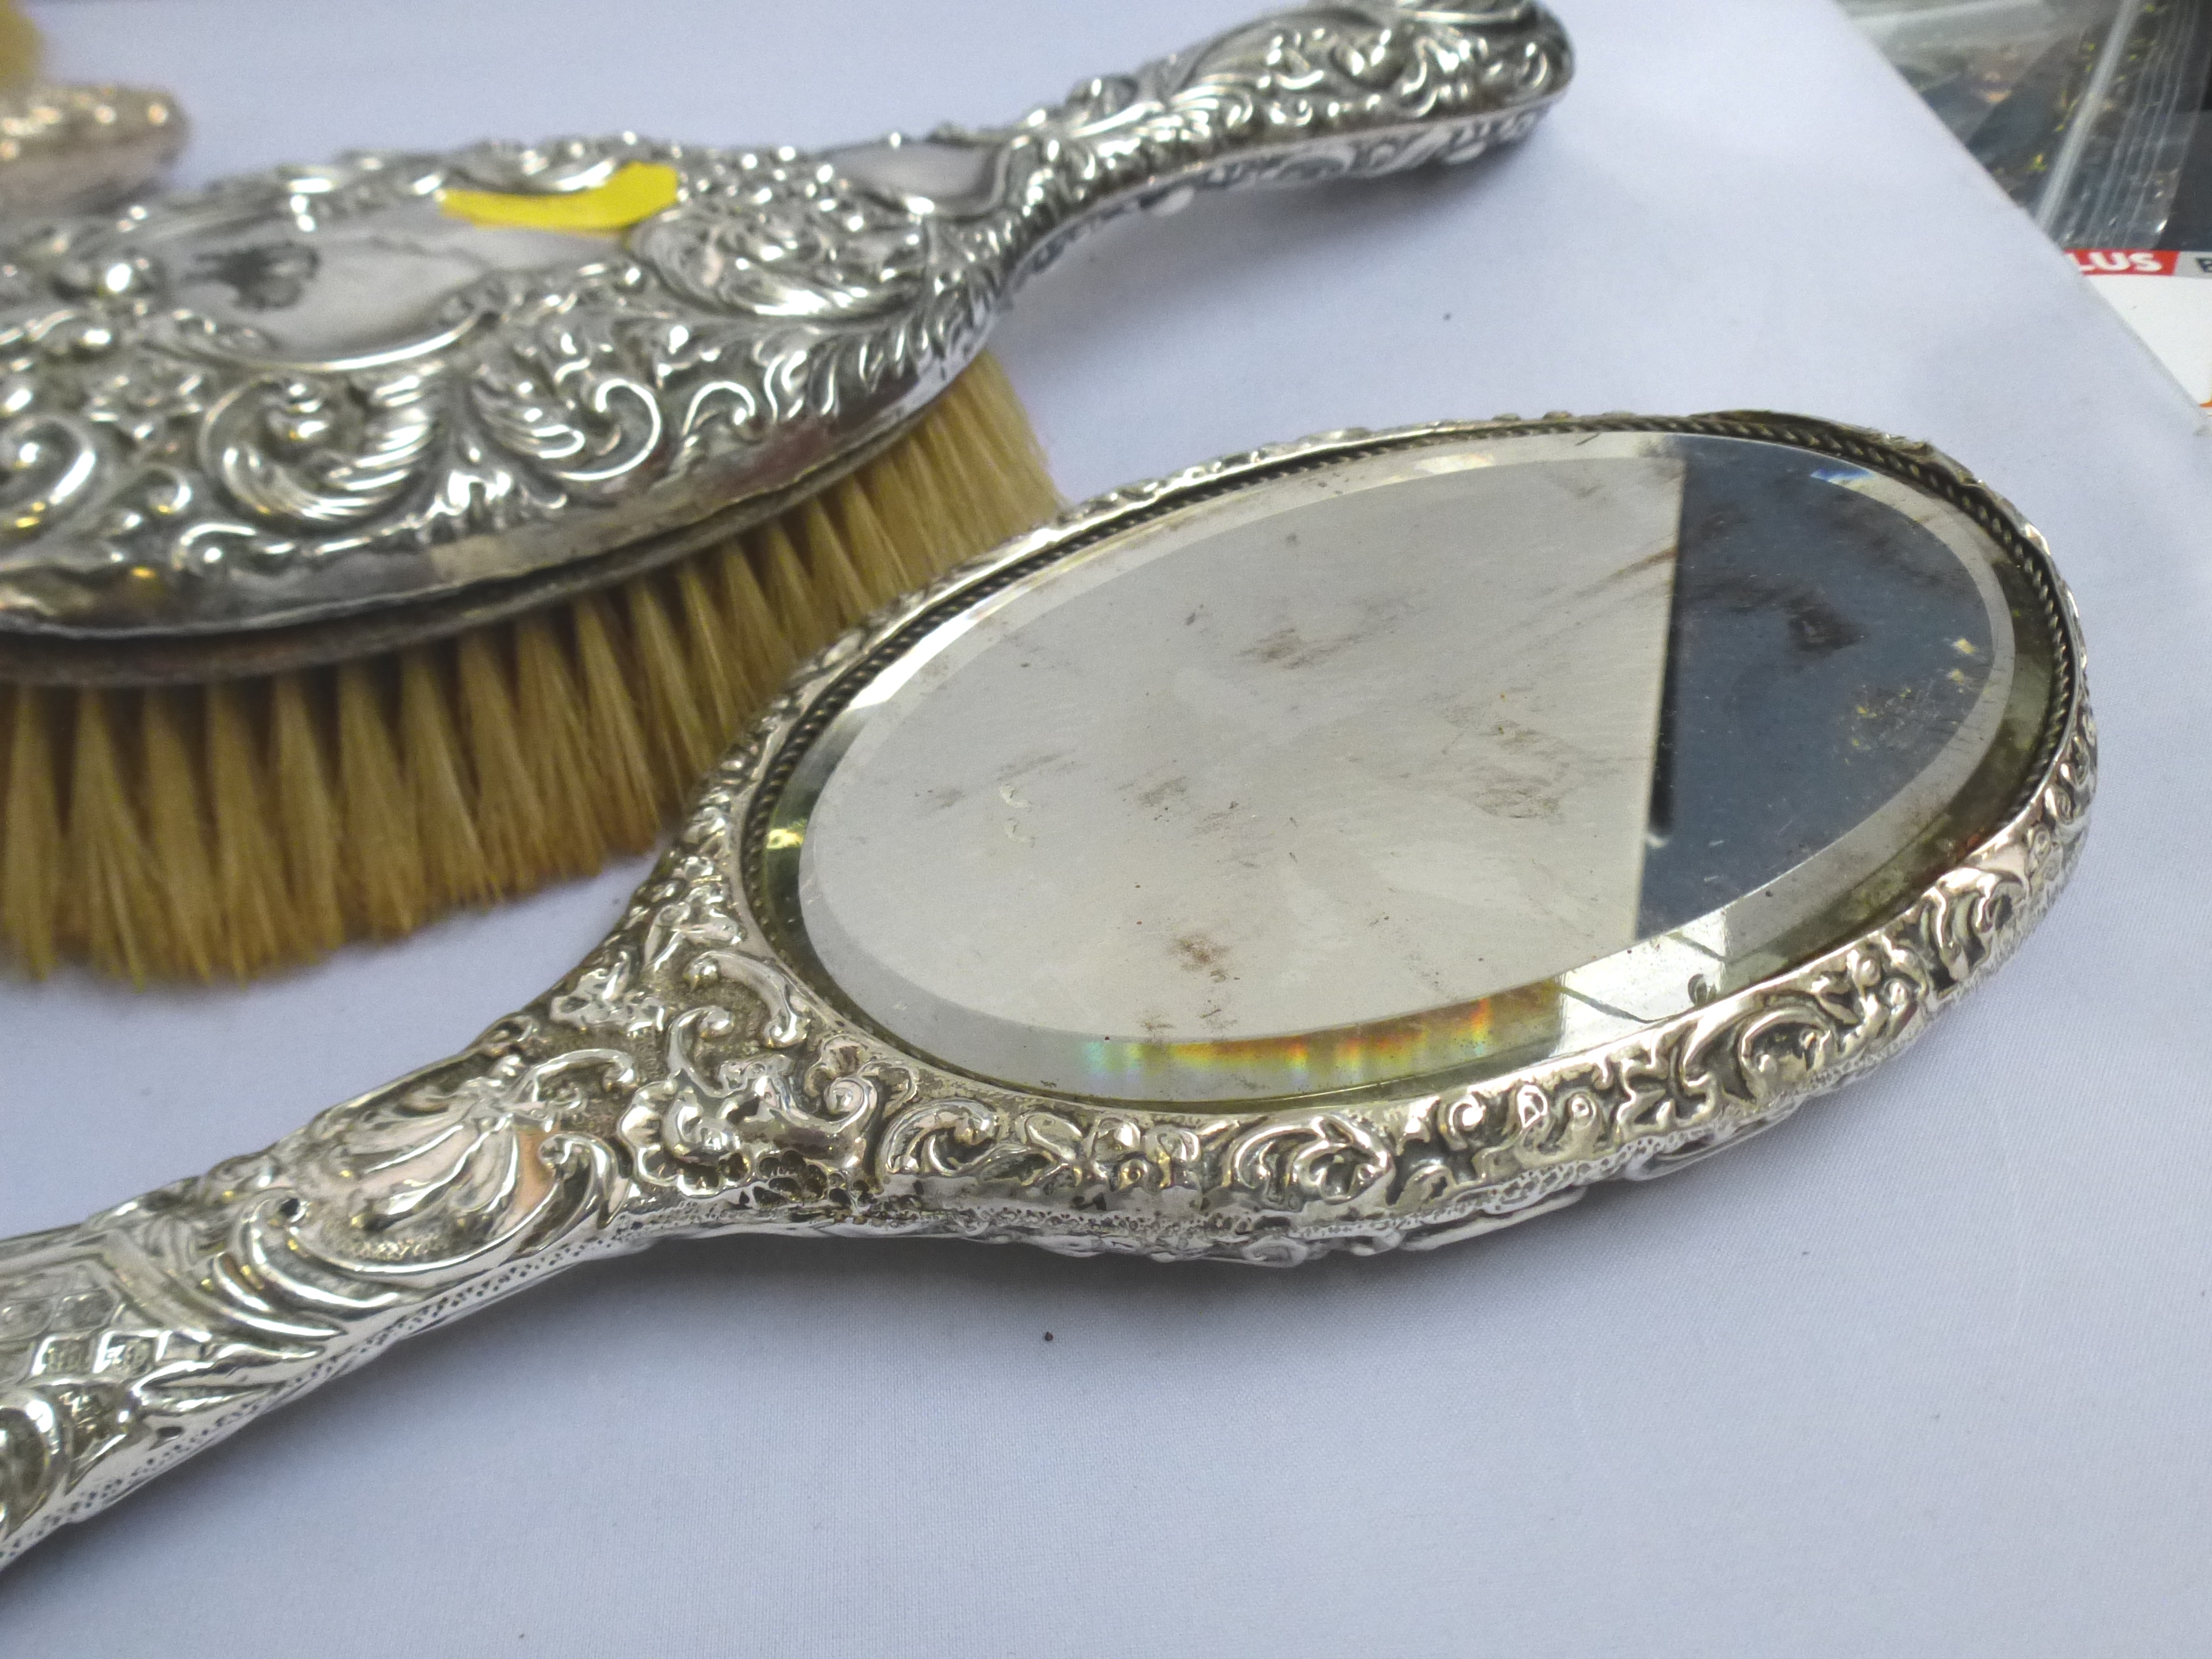 4 SILVER BACK BRUSHES AND A SILVER MIRROR - Image 10 of 14